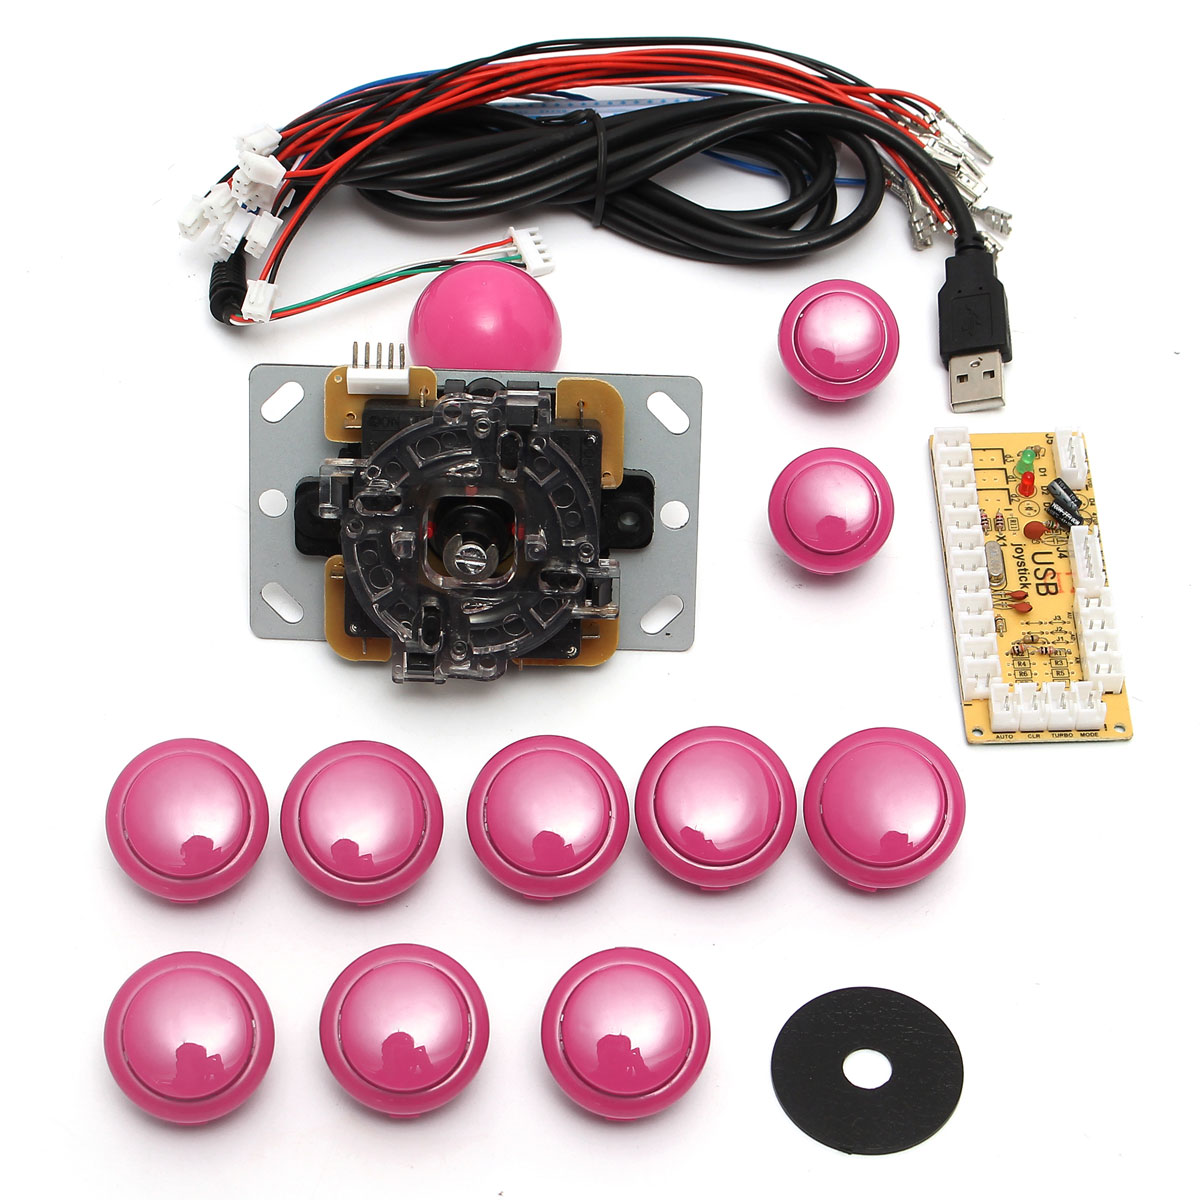 Game DIY Arcade Set Kits Replacement Parts USB Encoder to PC Joystick and Buttons 4